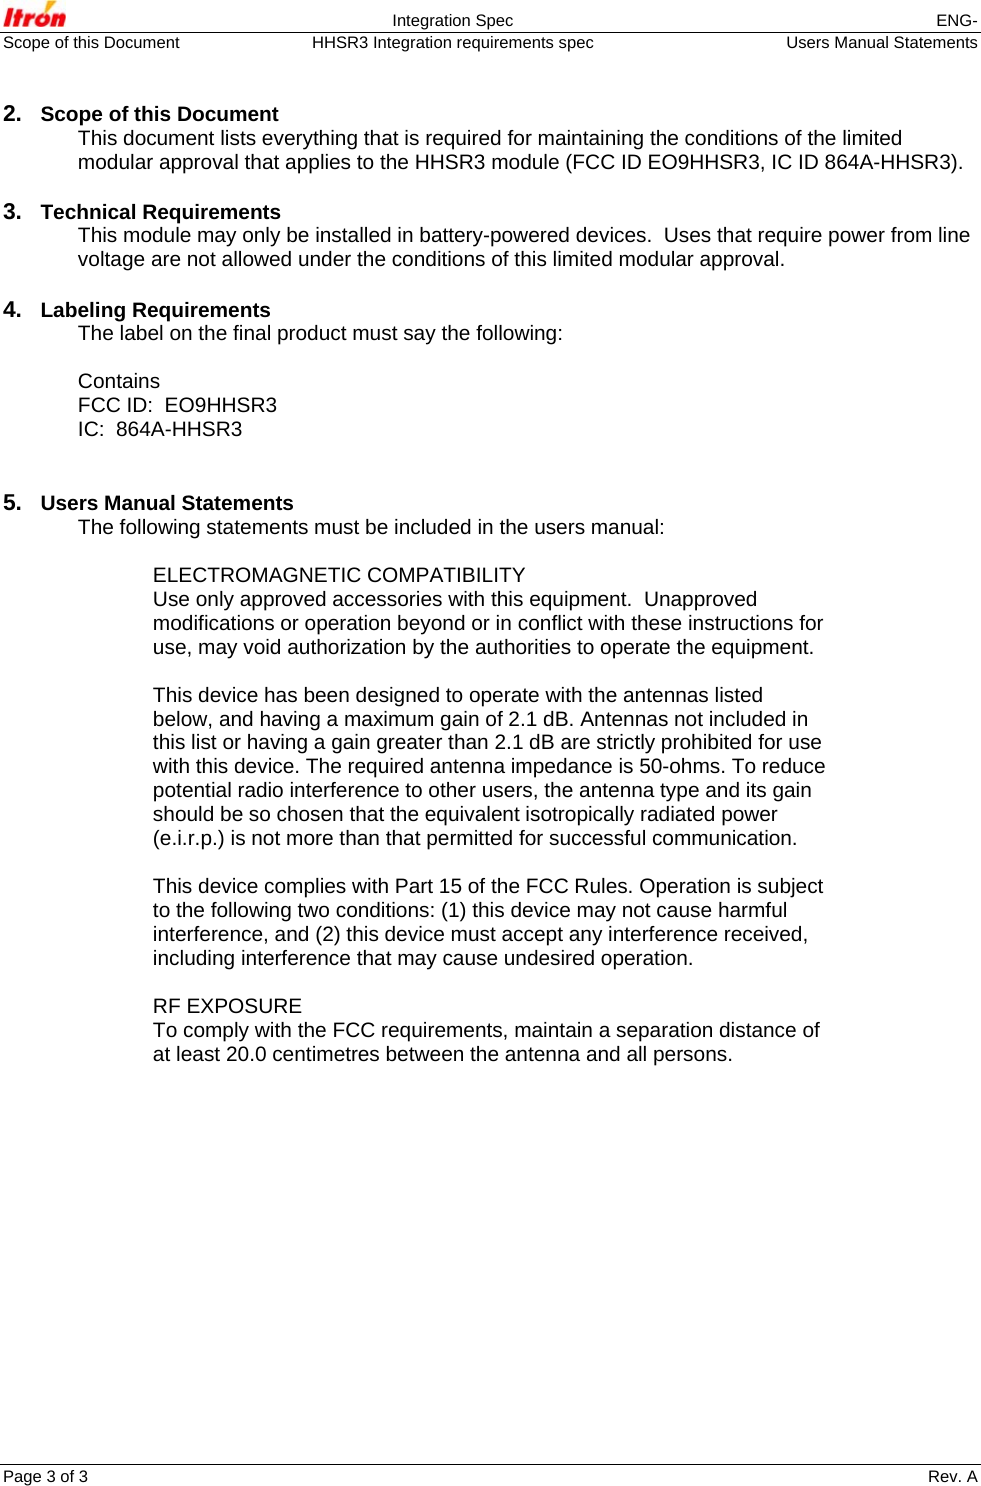  Integration Spec  ENG- Scope of this Document  HHSR3 Integration requirements spec   Users Manual Statements Page 3 of 3    Rev. A   2.  Scope of this Document This document lists everything that is required for maintaining the conditions of the limited modular approval that applies to the HHSR3 module (FCC ID EO9HHSR3, IC ID 864A-HHSR3).  3.  Technical Requirements This module may only be installed in battery-powered devices.  Uses that require power from line voltage are not allowed under the conditions of this limited modular approval.  4.  Labeling Requirements The label on the final product must say the following:  Contains FCC ID:  EO9HHSR3 IC:  864A-HHSR3   5.  Users Manual Statements The following statements must be included in the users manual:  ELECTROMAGNETIC COMPATIBILITY Use only approved accessories with this equipment.  Unapproved modifications or operation beyond or in conflict with these instructions for use, may void authorization by the authorities to operate the equipment.   This device has been designed to operate with the antennas listed below, and having a maximum gain of 2.1 dB. Antennas not included in this list or having a gain greater than 2.1 dB are strictly prohibited for use with this device. The required antenna impedance is 50-ohms. To reduce potential radio interference to other users, the antenna type and its gain should be so chosen that the equivalent isotropically radiated power (e.i.r.p.) is not more than that permitted for successful communication.  This device complies with Part 15 of the FCC Rules. Operation is subject to the following two conditions: (1) this device may not cause harmful interference, and (2) this device must accept any interference received, including interference that may cause undesired operation.  RF EXPOSURE To comply with the FCC requirements, maintain a separation distance of at least 20.0 centimetres between the antenna and all persons.    